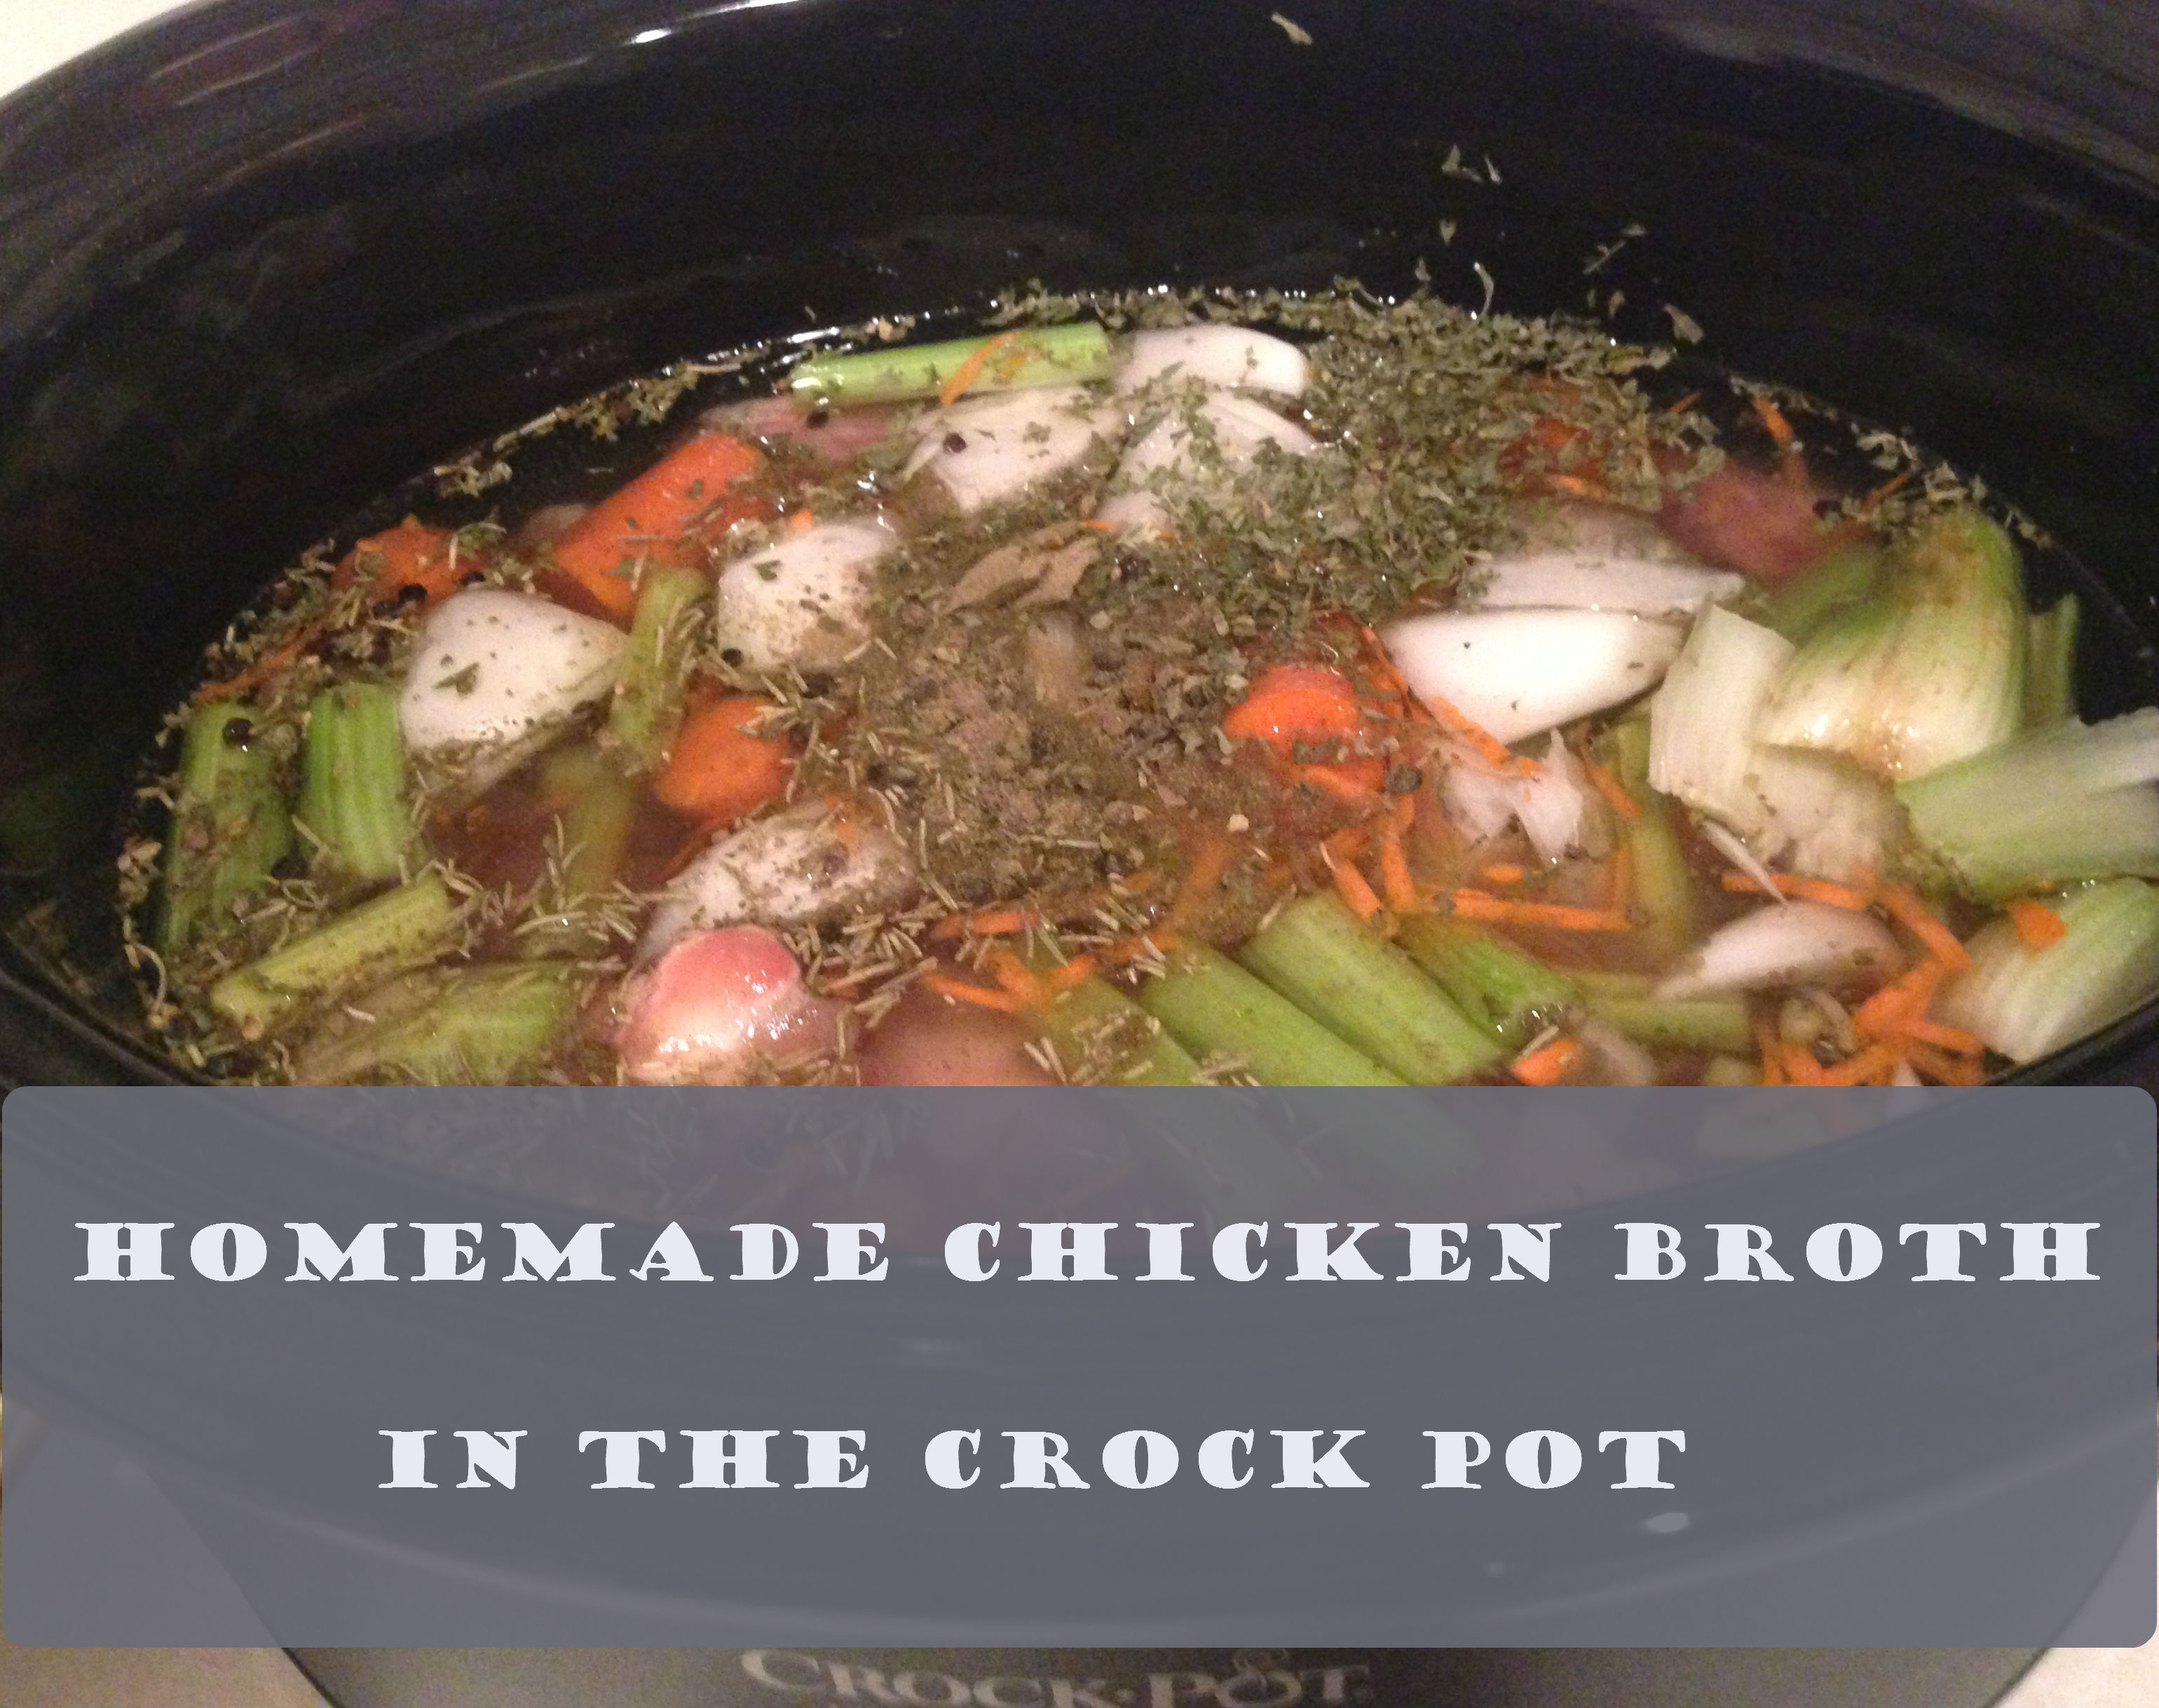 Homemade Chicken Broth–in the Crock Pot